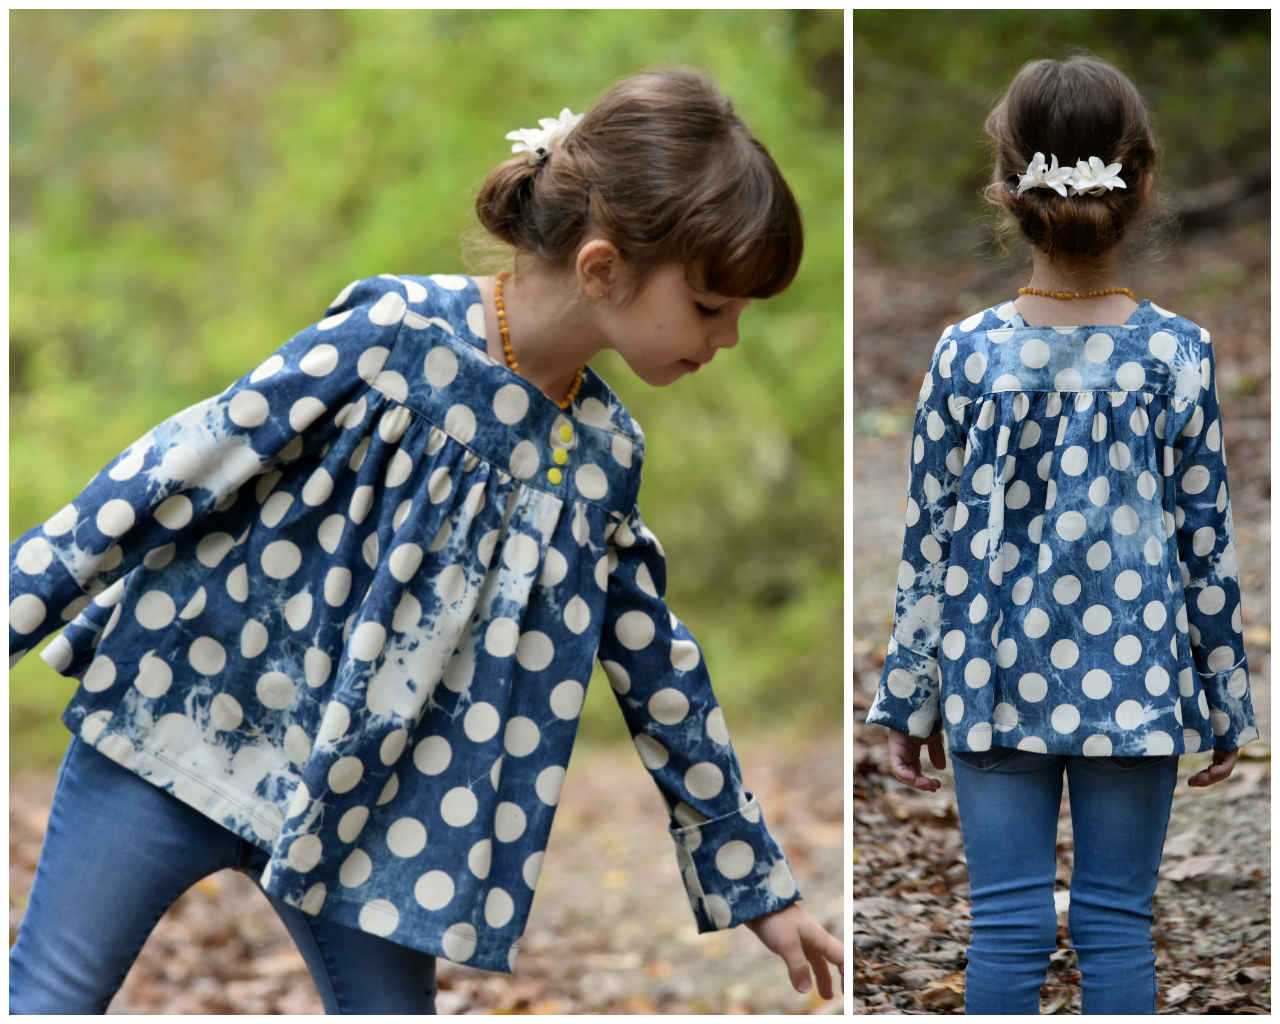 Virginia girls long sleeved blouse, pdf sewing pattern, back to school, autumn sewing, frocks & frolics